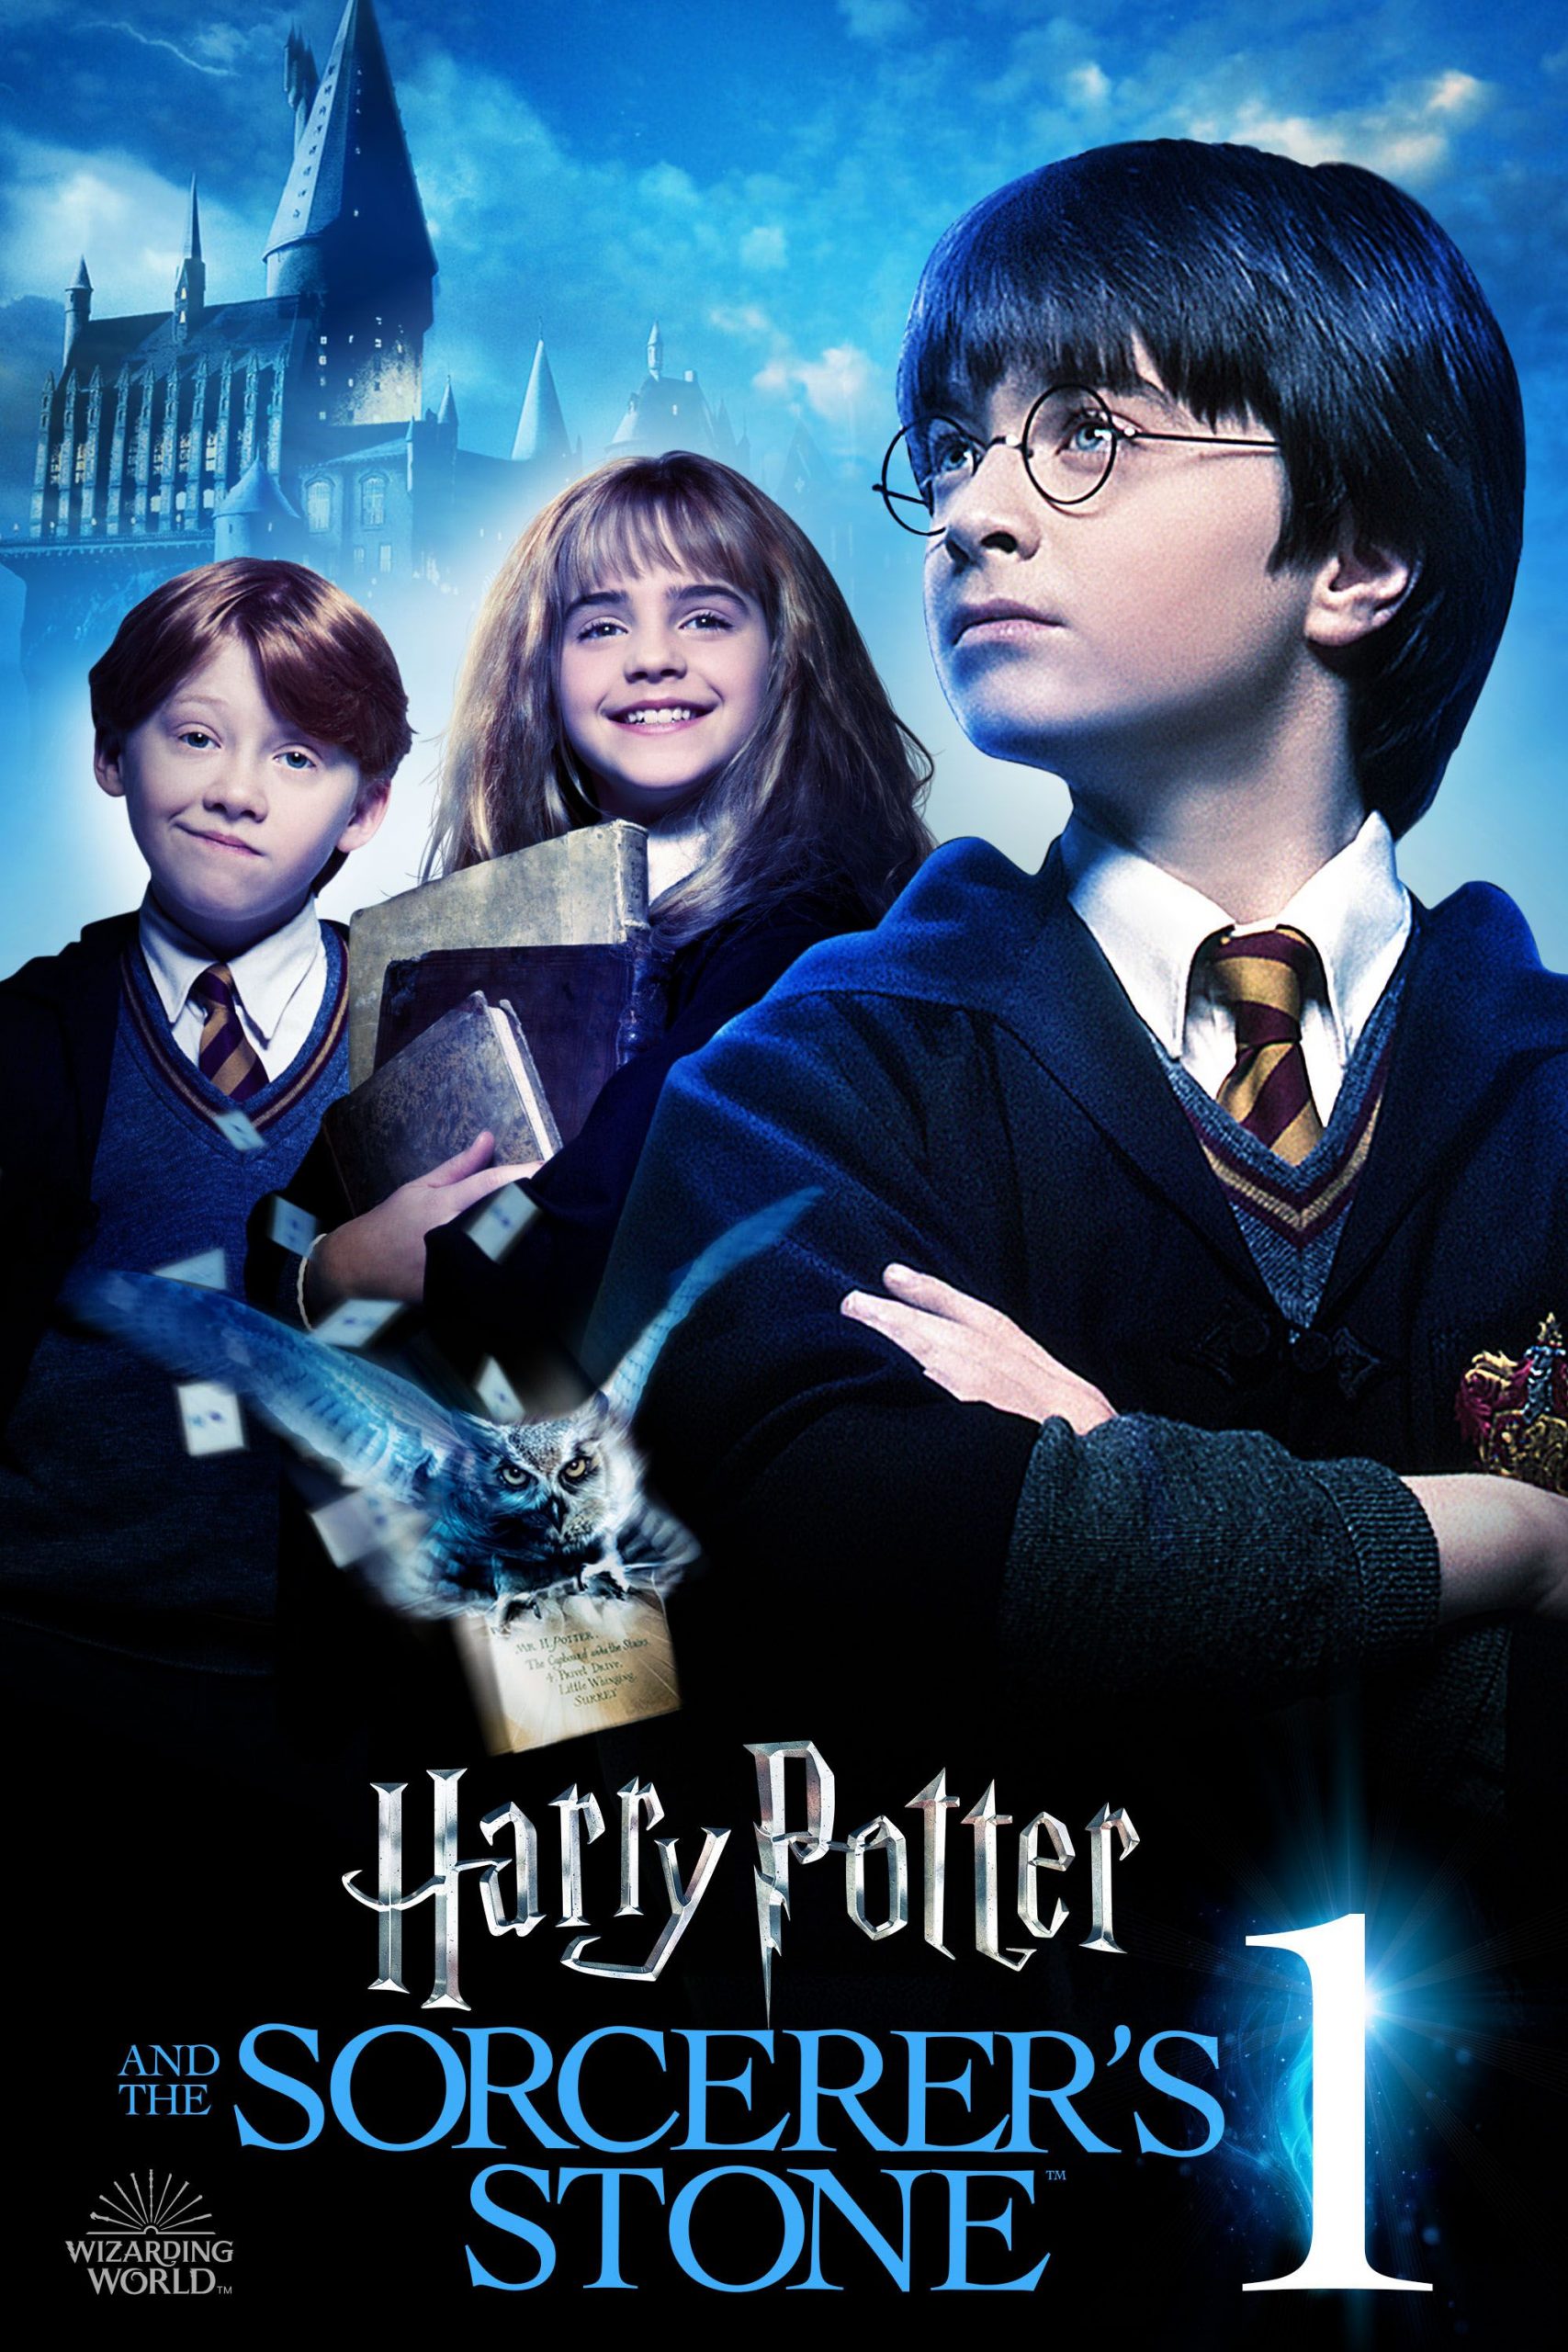 Download Harry Potter and the Sorcerers Stone 2001 BluRay Dual Audio Hindi ORG 4k | 1080p | 720p | 480p [350MB] download